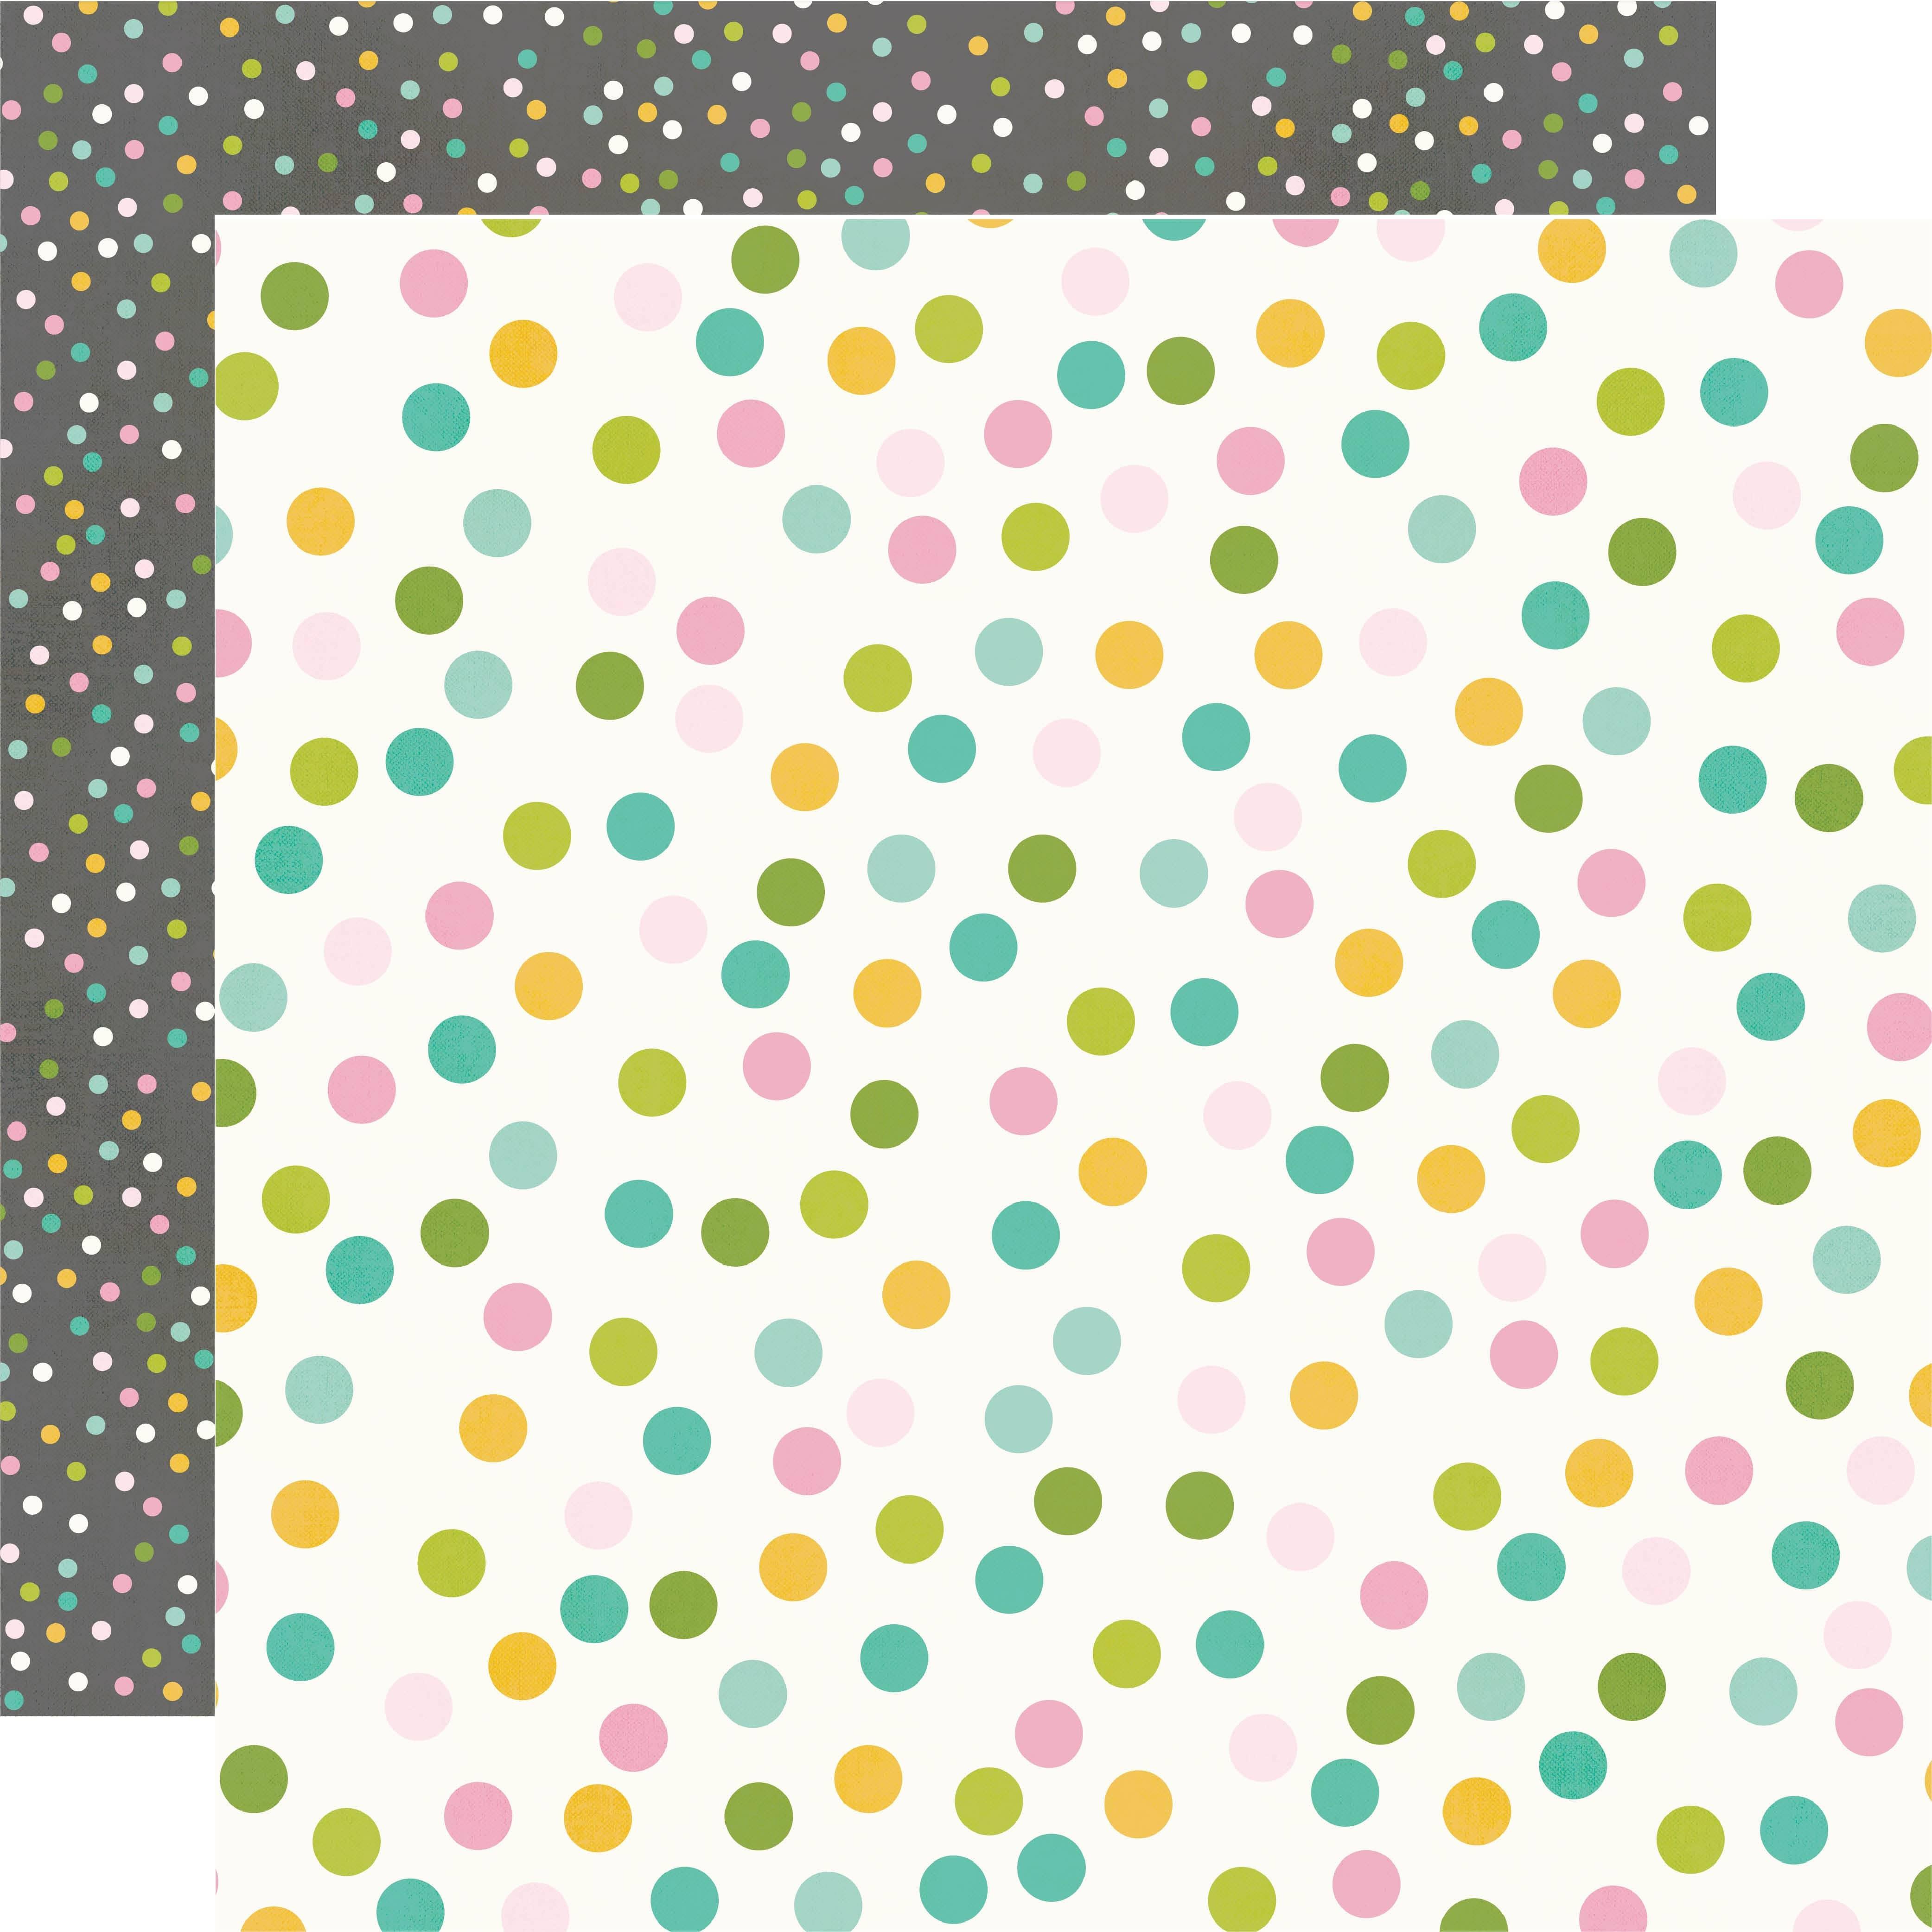 Say Cheese Fantasy At The Park Collection Dreams Come True 12 x 12 Double-Sided Scrapbook Paper by Simple Stories - Scrapbook Supply Companies